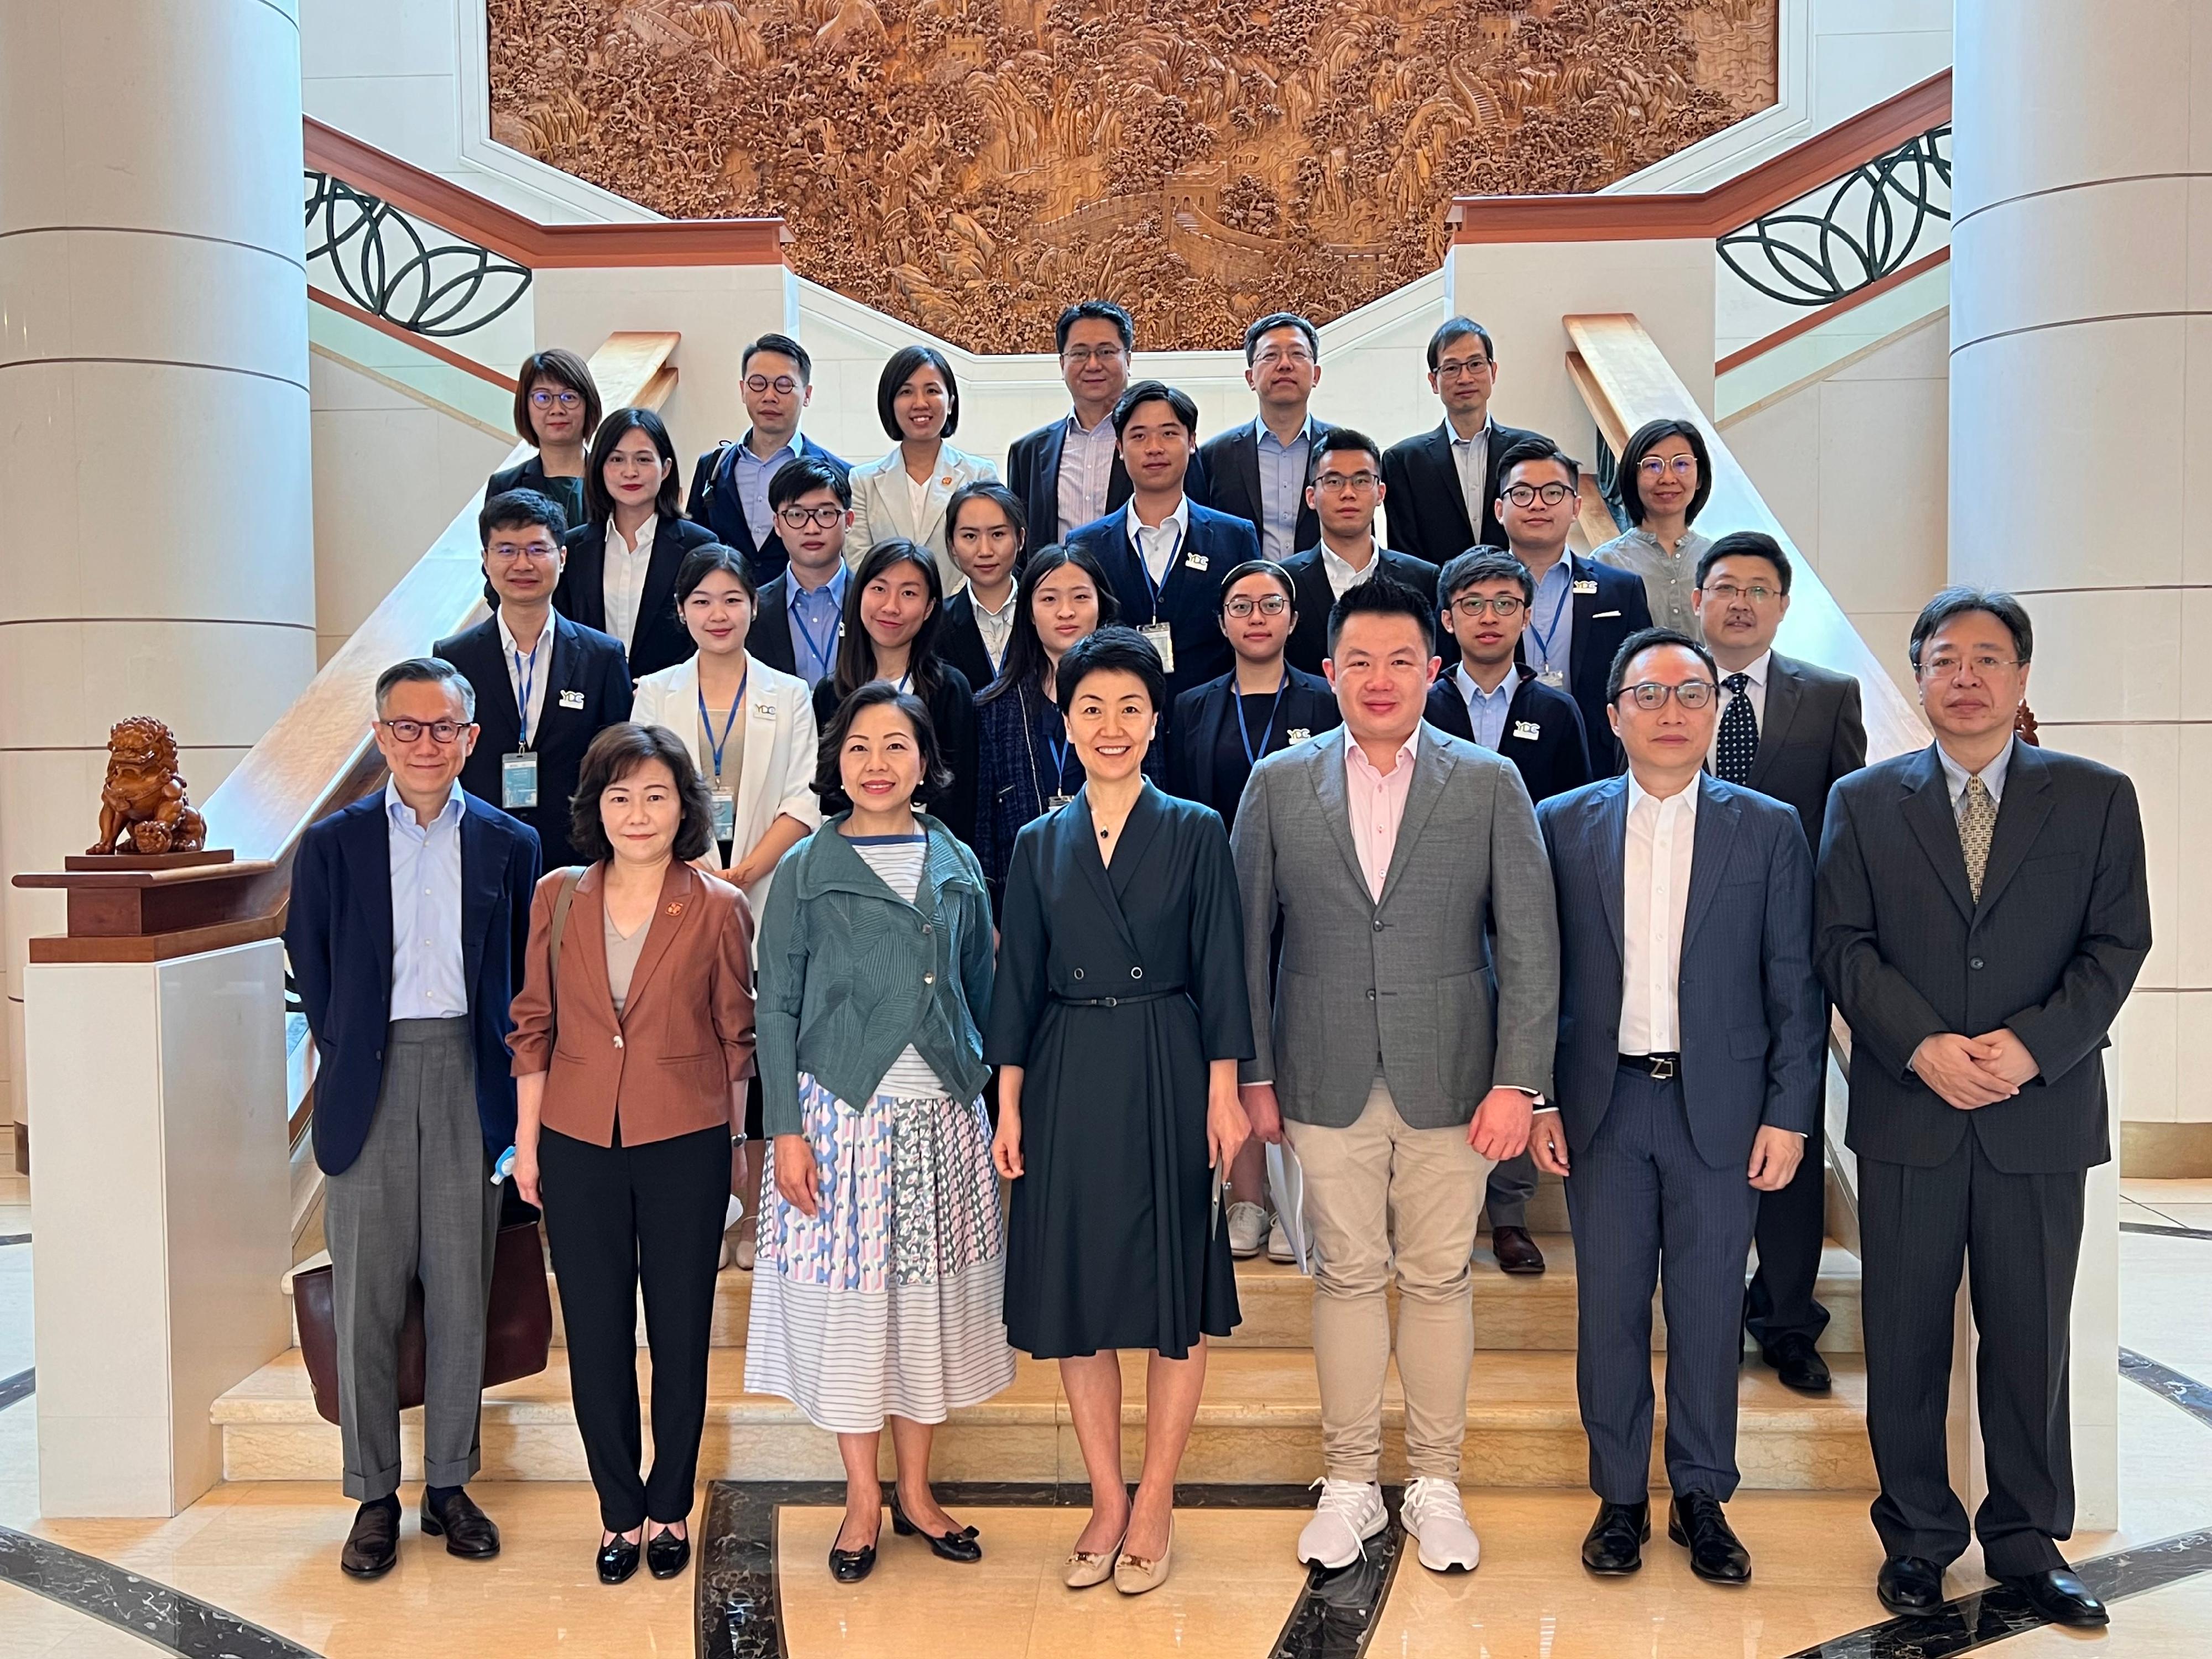 The Secretary for Home and Youth Affairs, Miss Alice Mak, today (February 18) paid a visit to the Embassy of the People's Republic of China in the Republic of Singapore and met with the Chinese Ambassador to Singapore, Ms Sun Haiyan. Photo shows Miss Mak (first row, third left); the Director of Home Affairs, Mrs Alice Cheung (first row, second left); the Vice-Chairman of the Youth Development Commission, Mr Kenneth Leung (first row, third right), and Ms Sun (first row, centre) at the Embassy.
